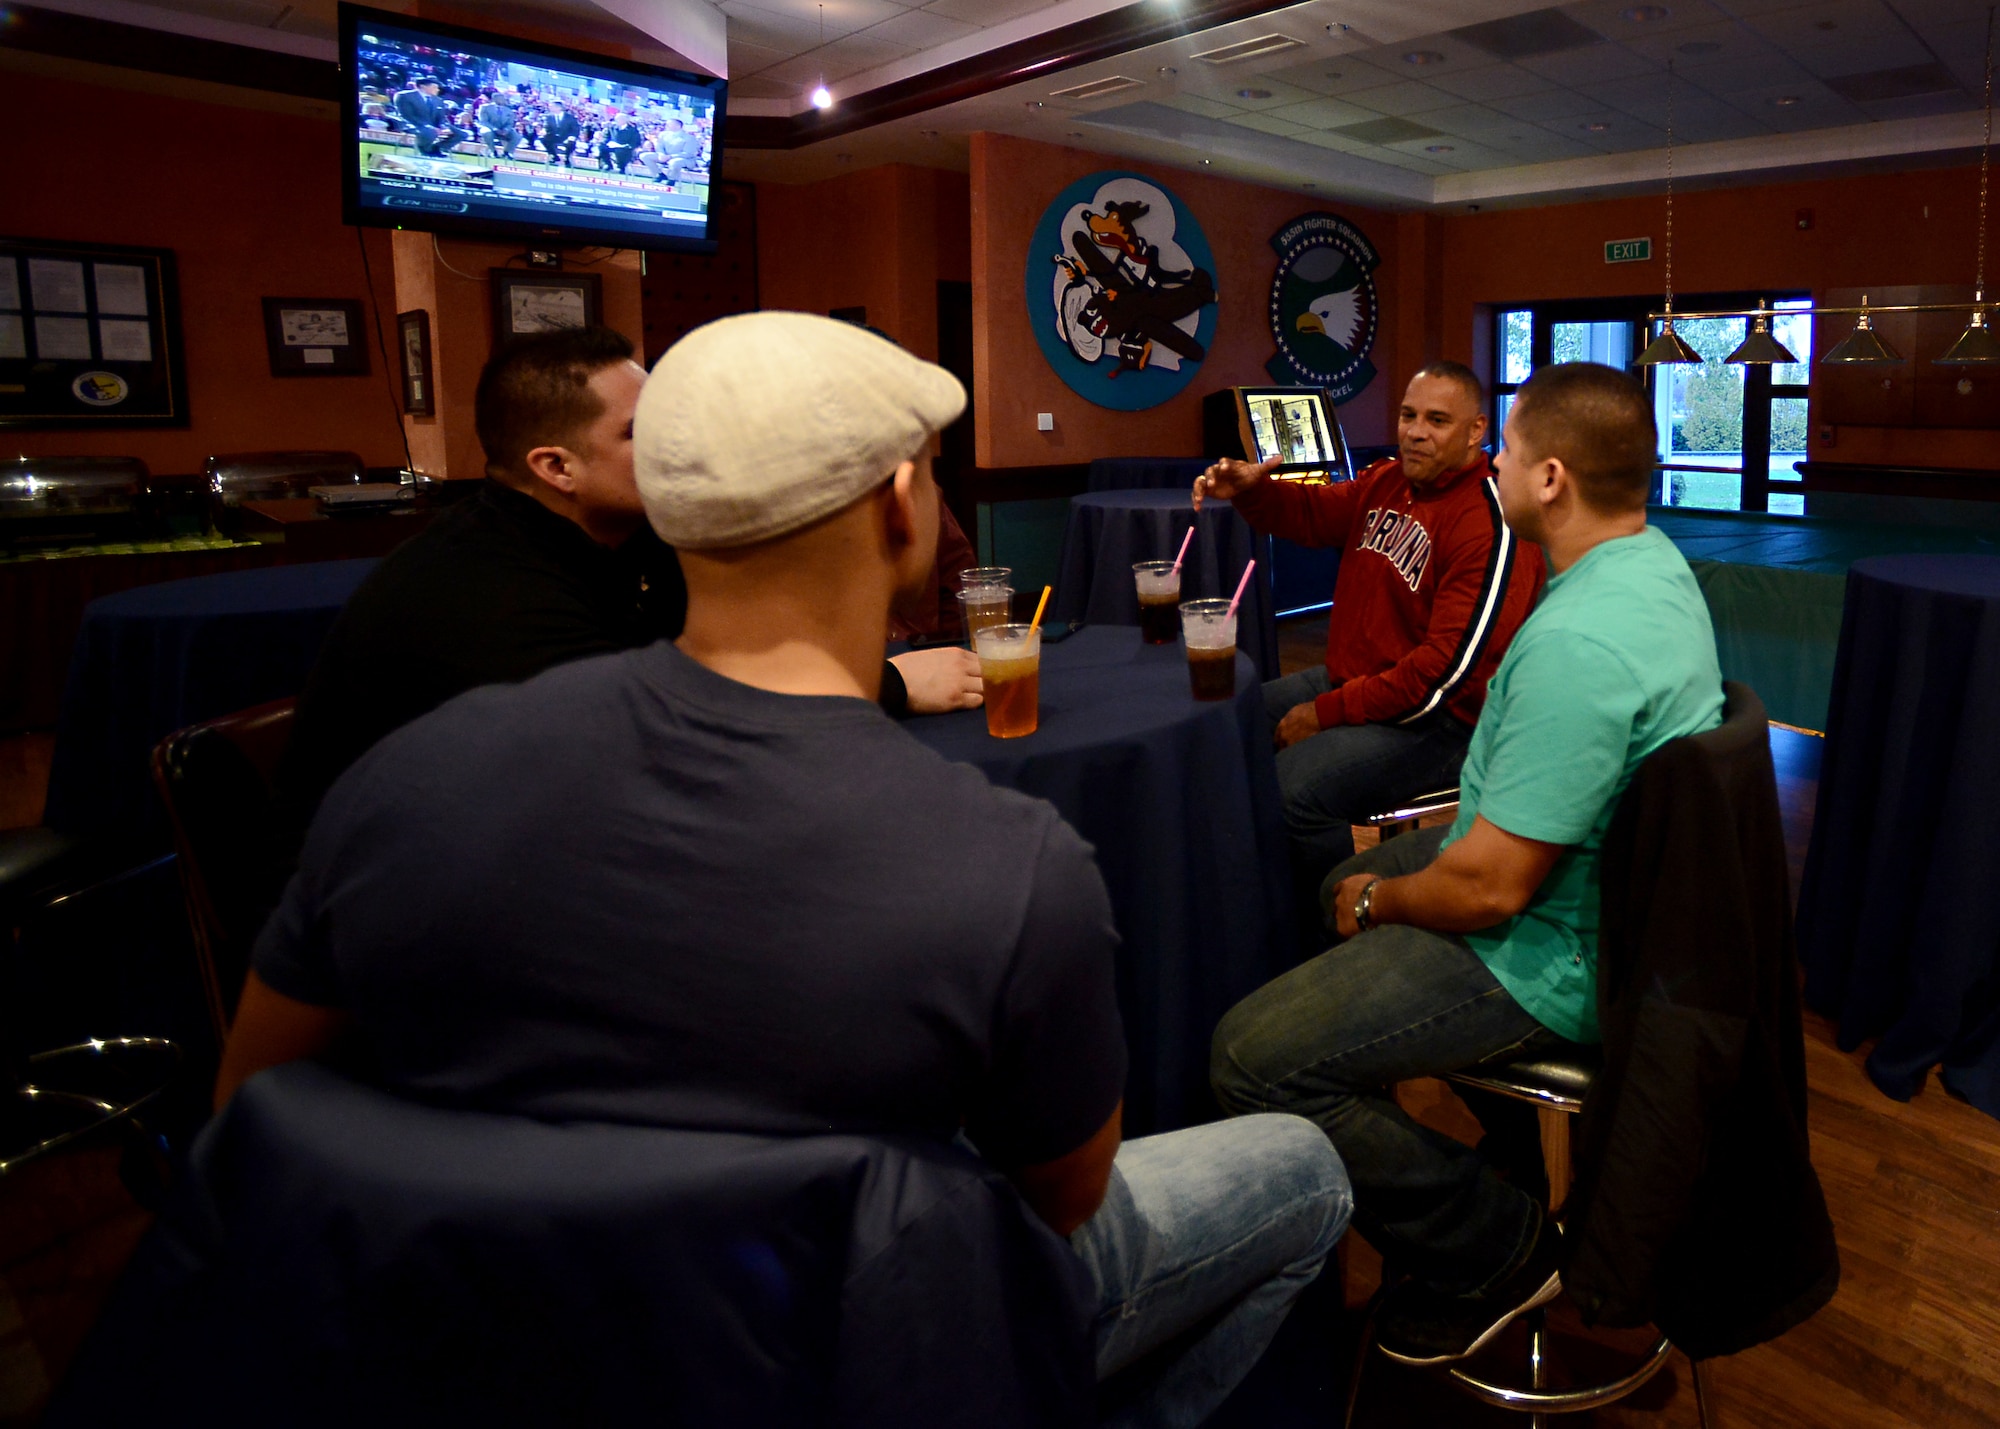 The Aviano’s Integral Men group watches football and chats during their inaugural event, Nov. 15, 2014, at Aviano Air Base, Italy. AIM is a new group tailored to husbands of active-duty service members. (U.S. Air Force photo/Staff Sgt. R.J. Biermann) 